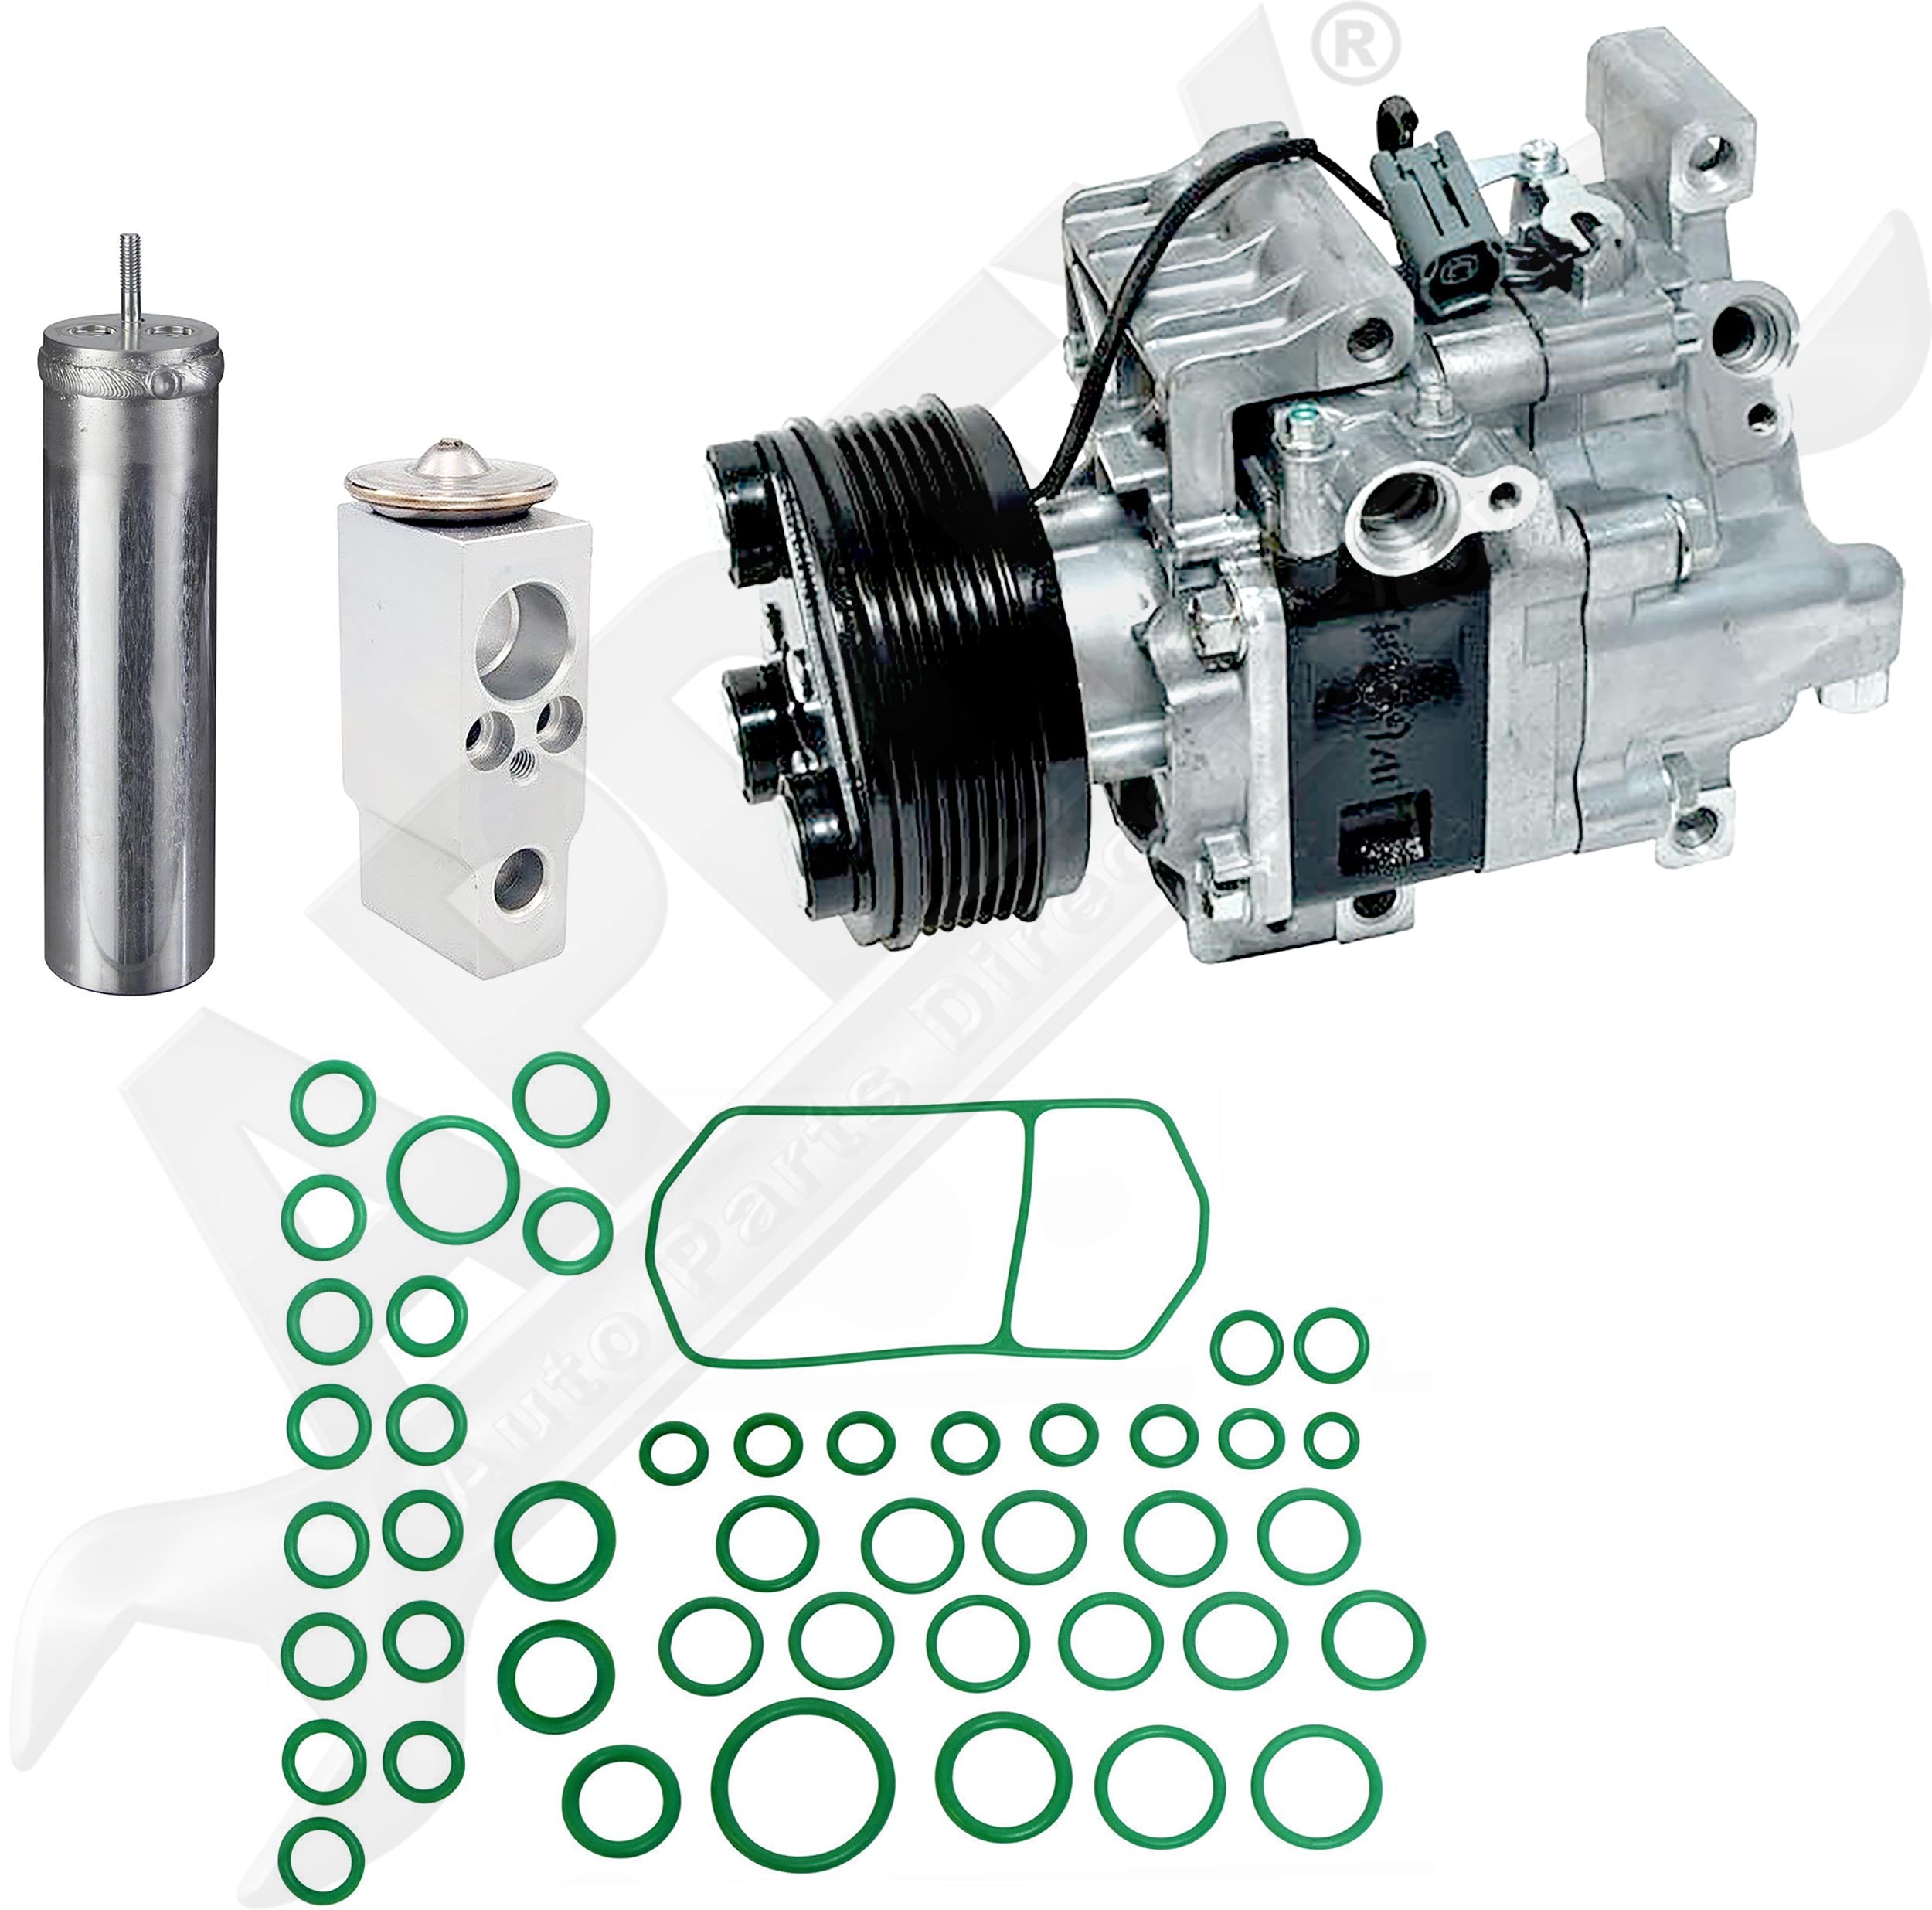 APDTY, APDTY 141281 AC Air Conditioning Compressor Kit w/ Dryer & Expansion Valve